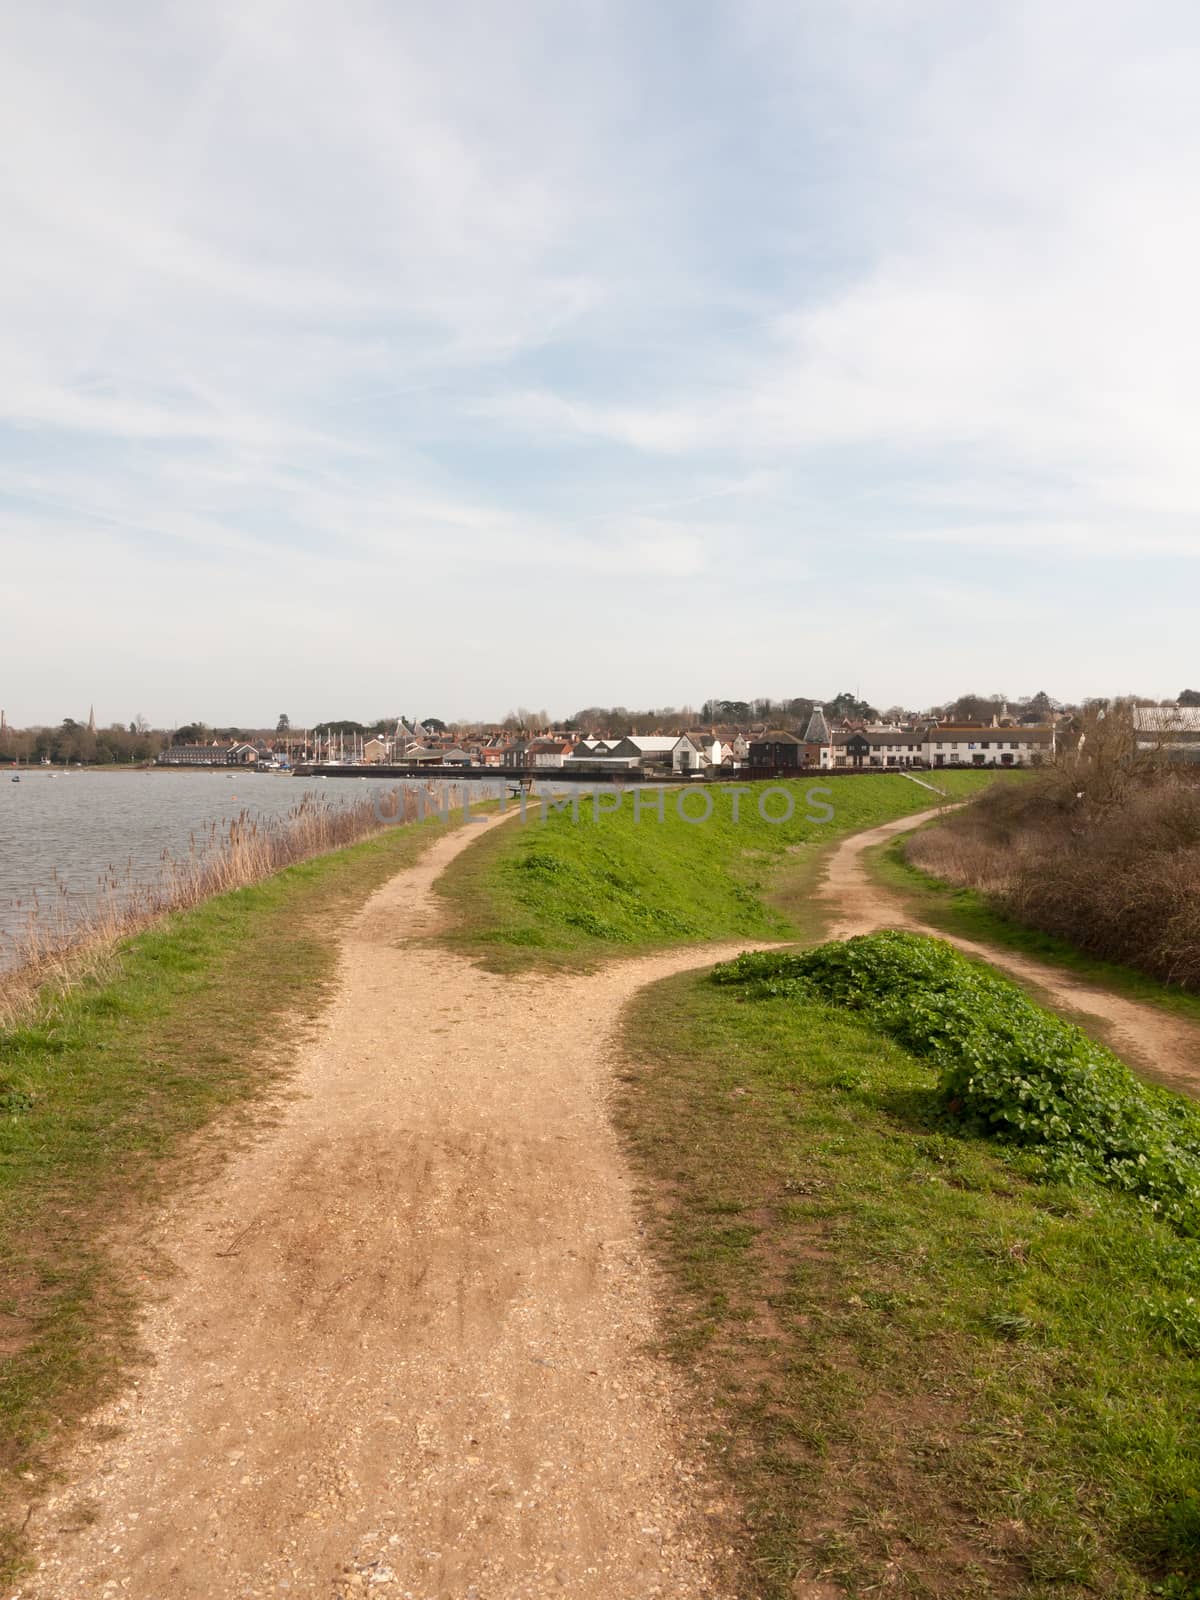 long walkway trail at side of bay of water uk manningtree nature background by callumrc